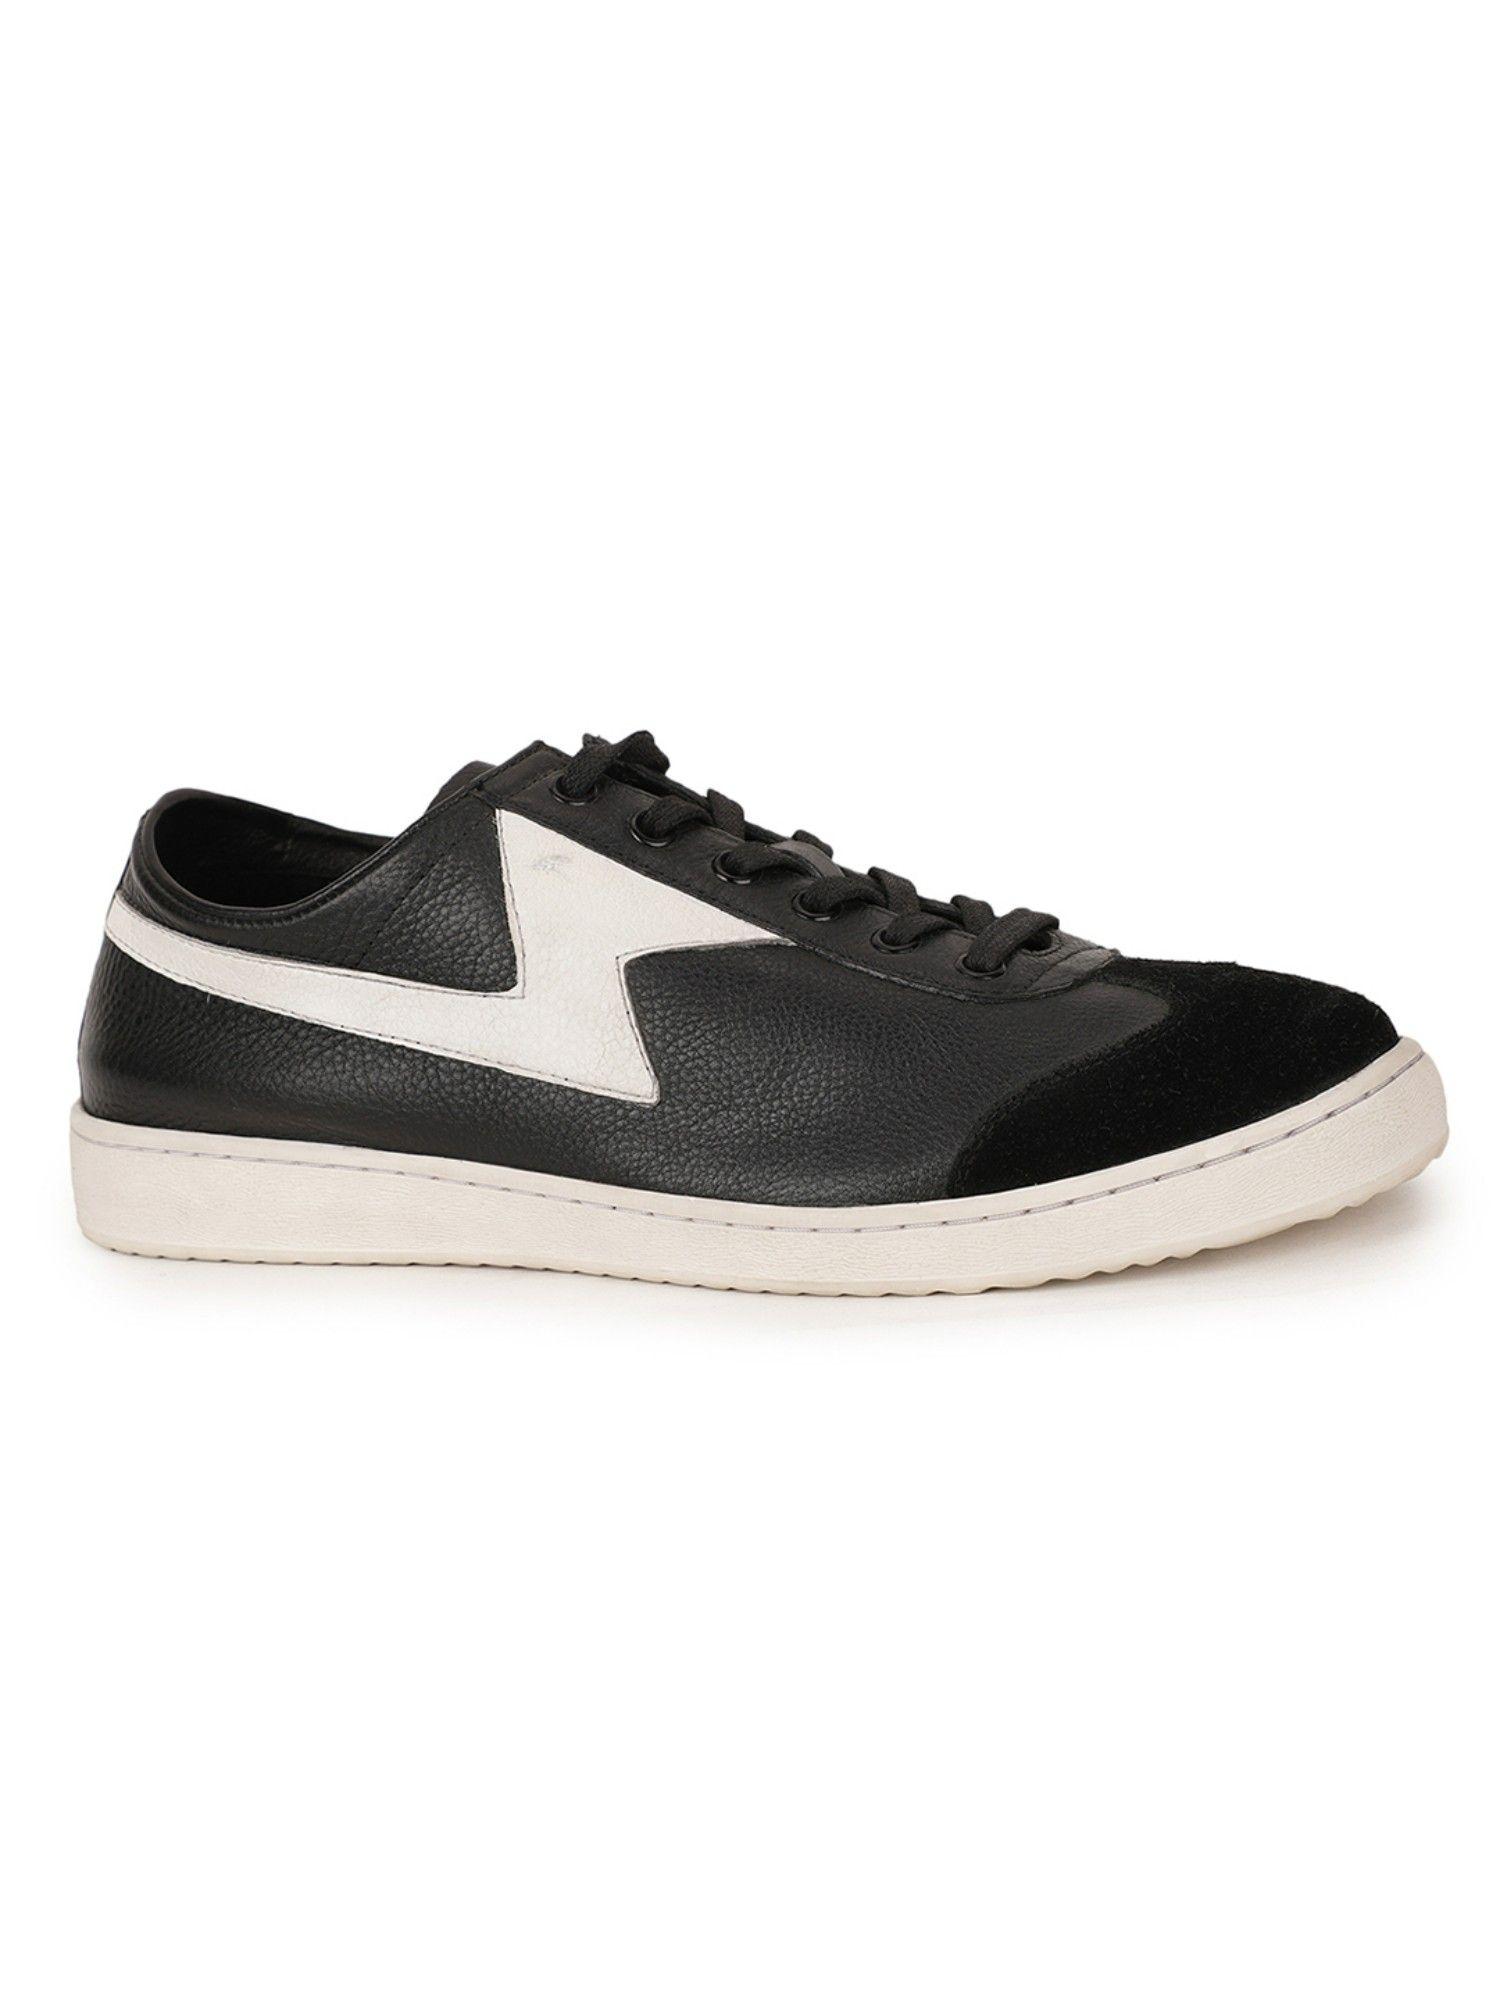 smith new sneakers for men (black)